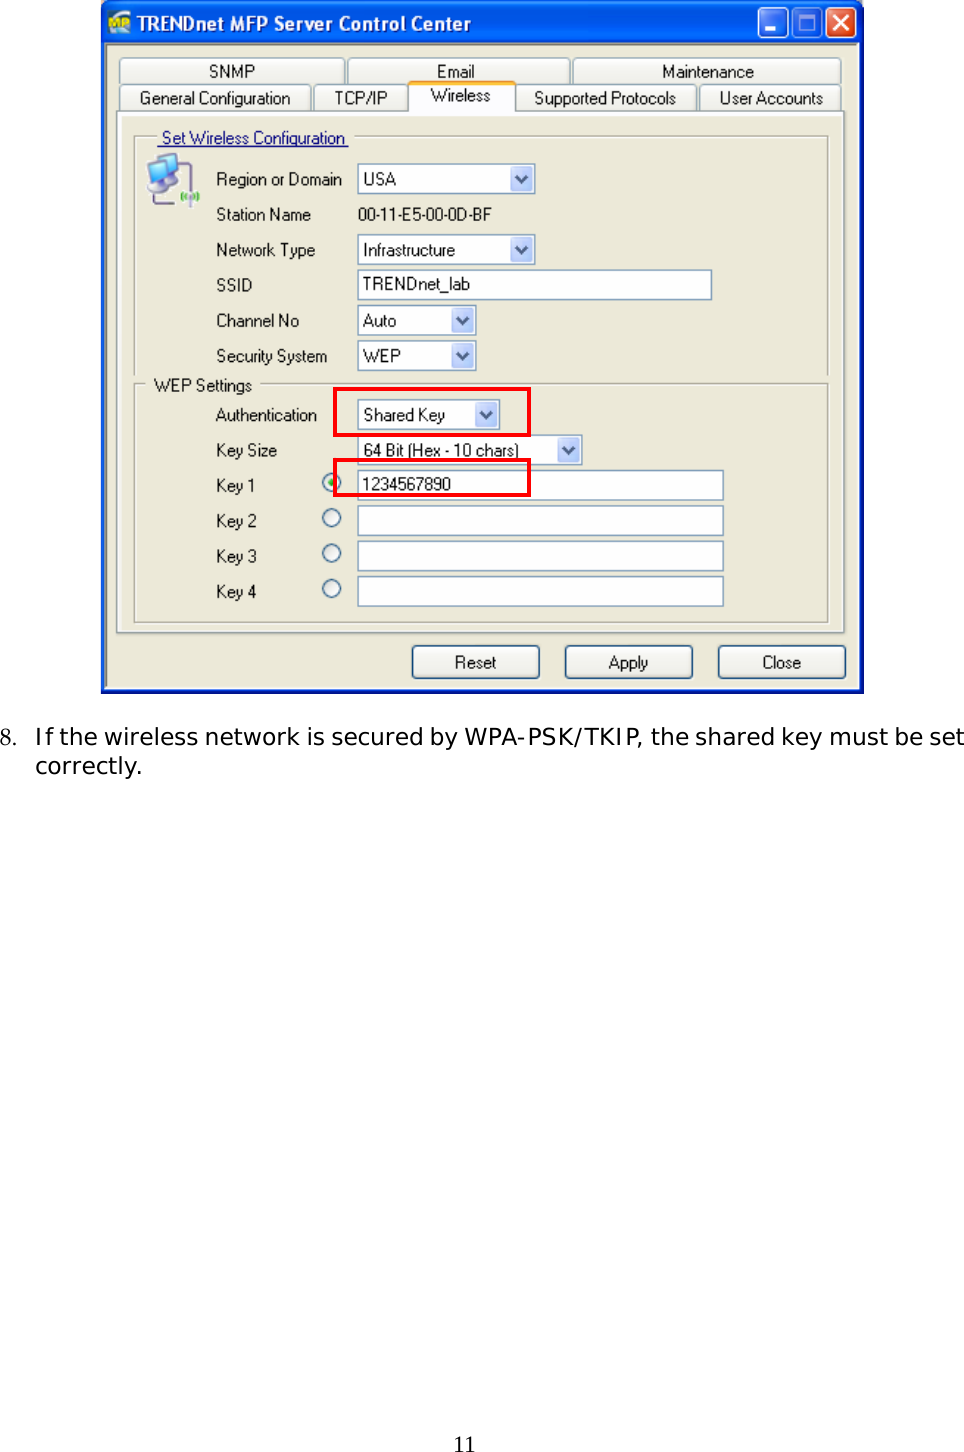     11  8. If the wireless network is secured by WPA-PSK/TKIP, the shared key must be set correctly.  